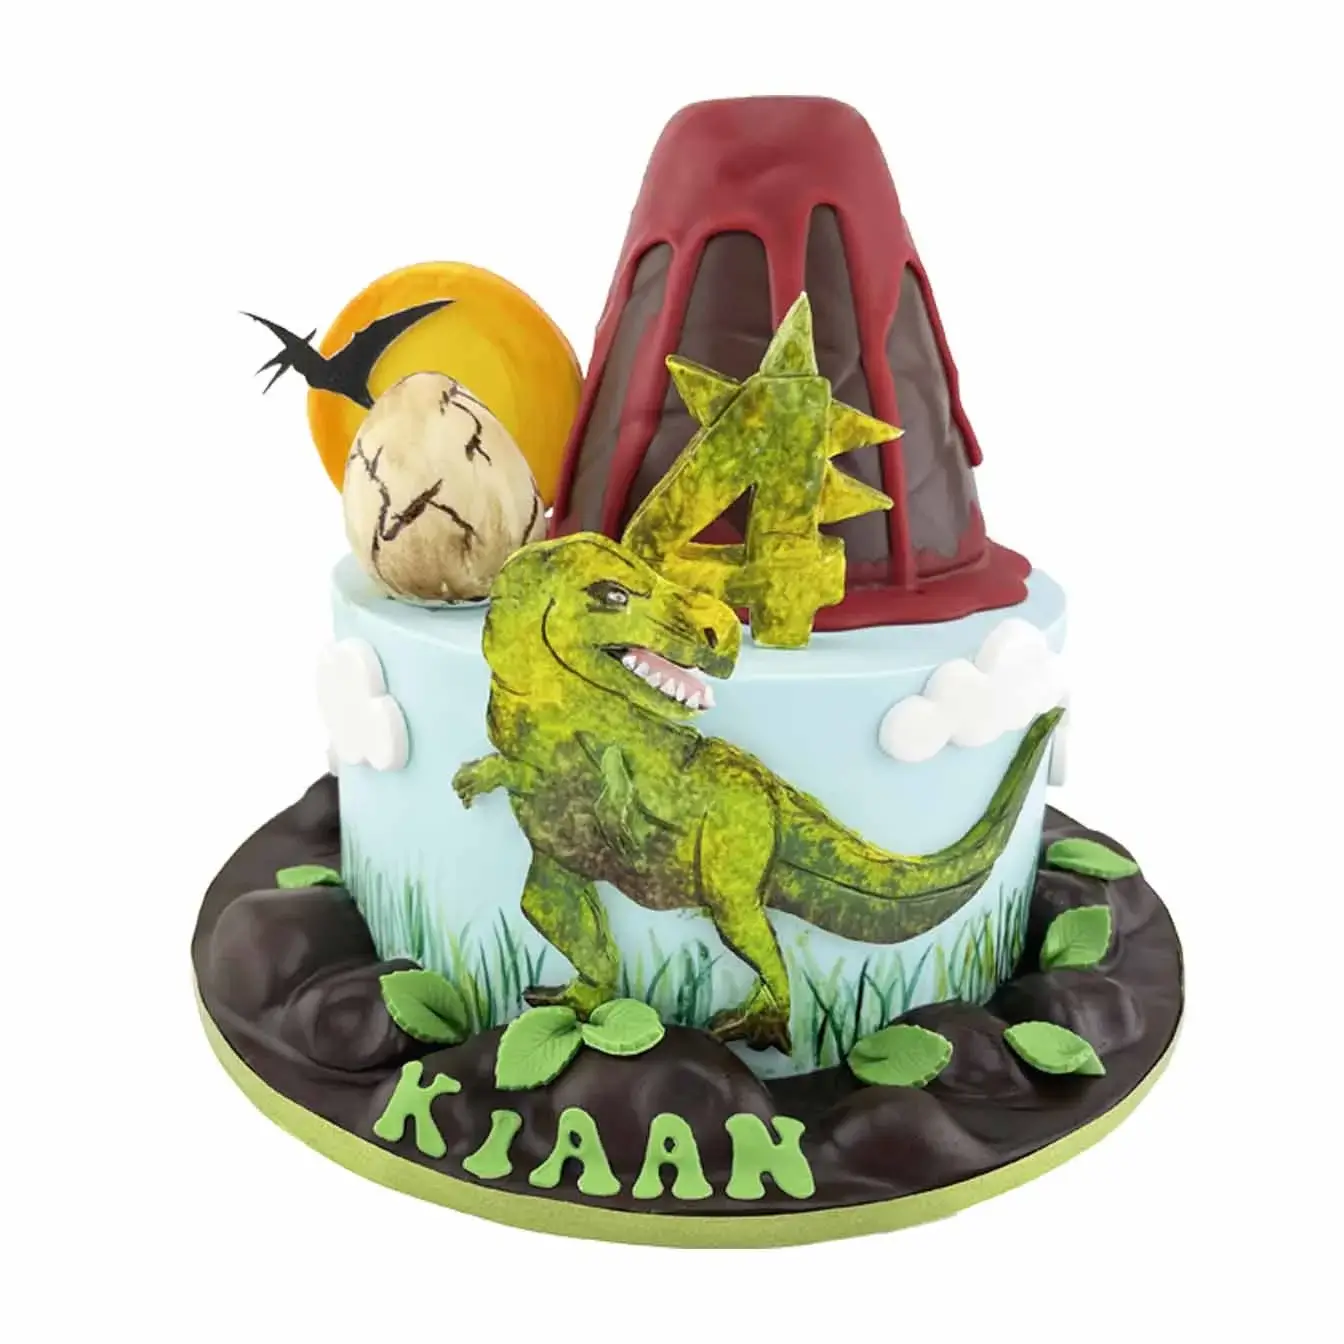 Dinosaur cake with T-Rex cutout, volcano, and dinosaur egg decorations.